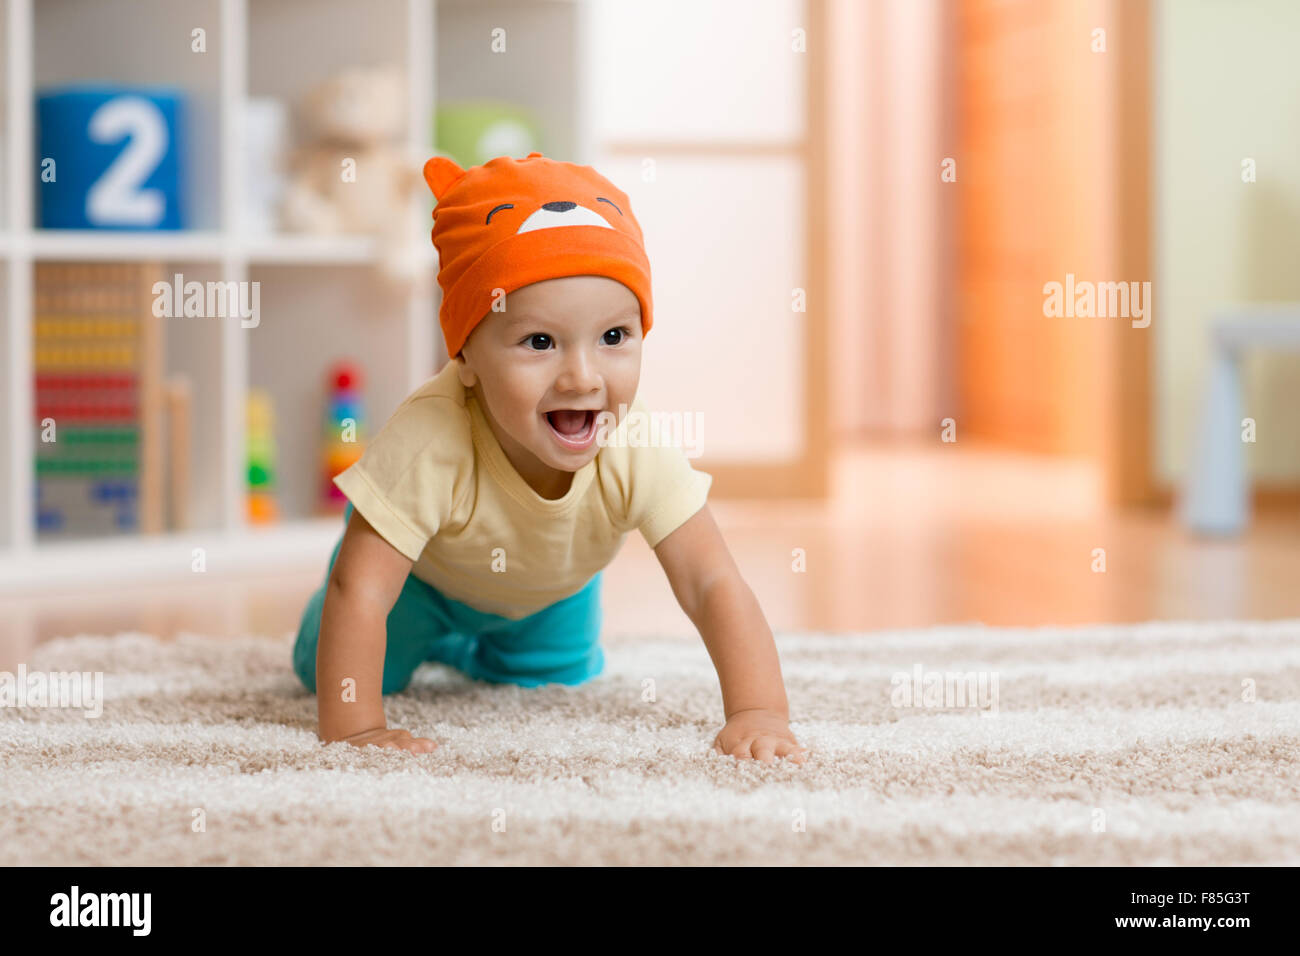 crawling kid or child at home on carpet Stock Photo